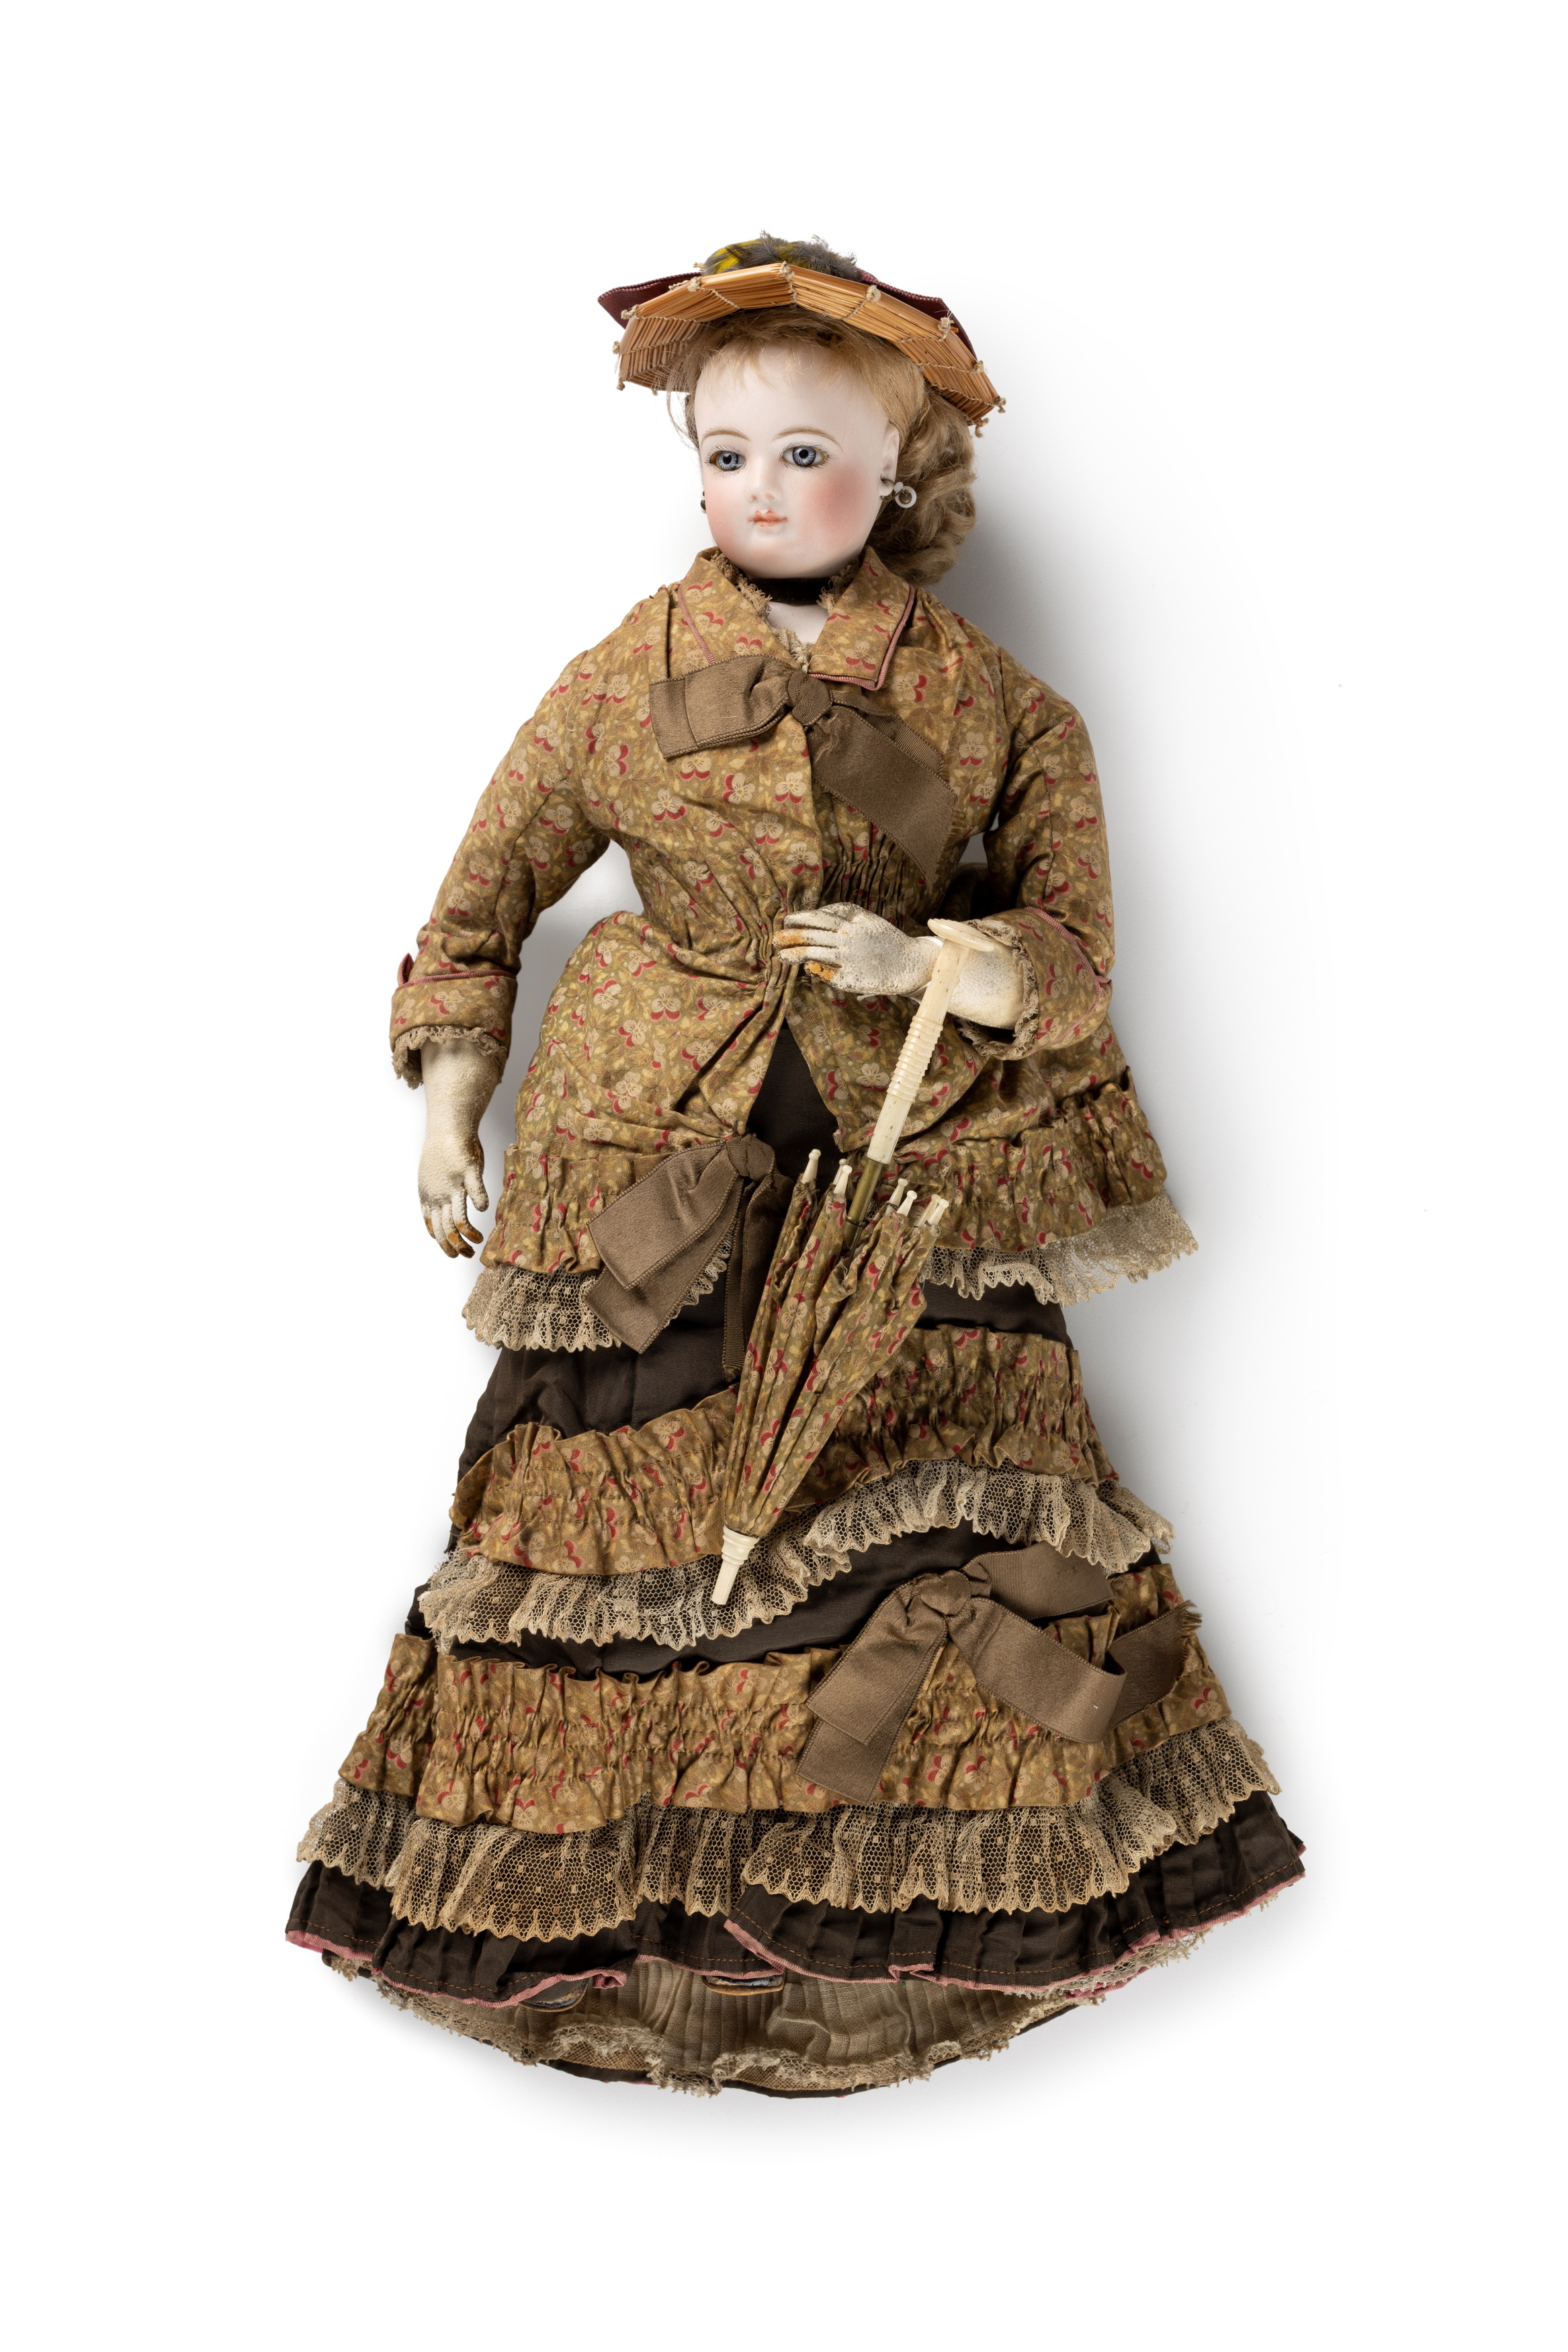 Bisque fashion doll and accessories by Edouard Chauviere